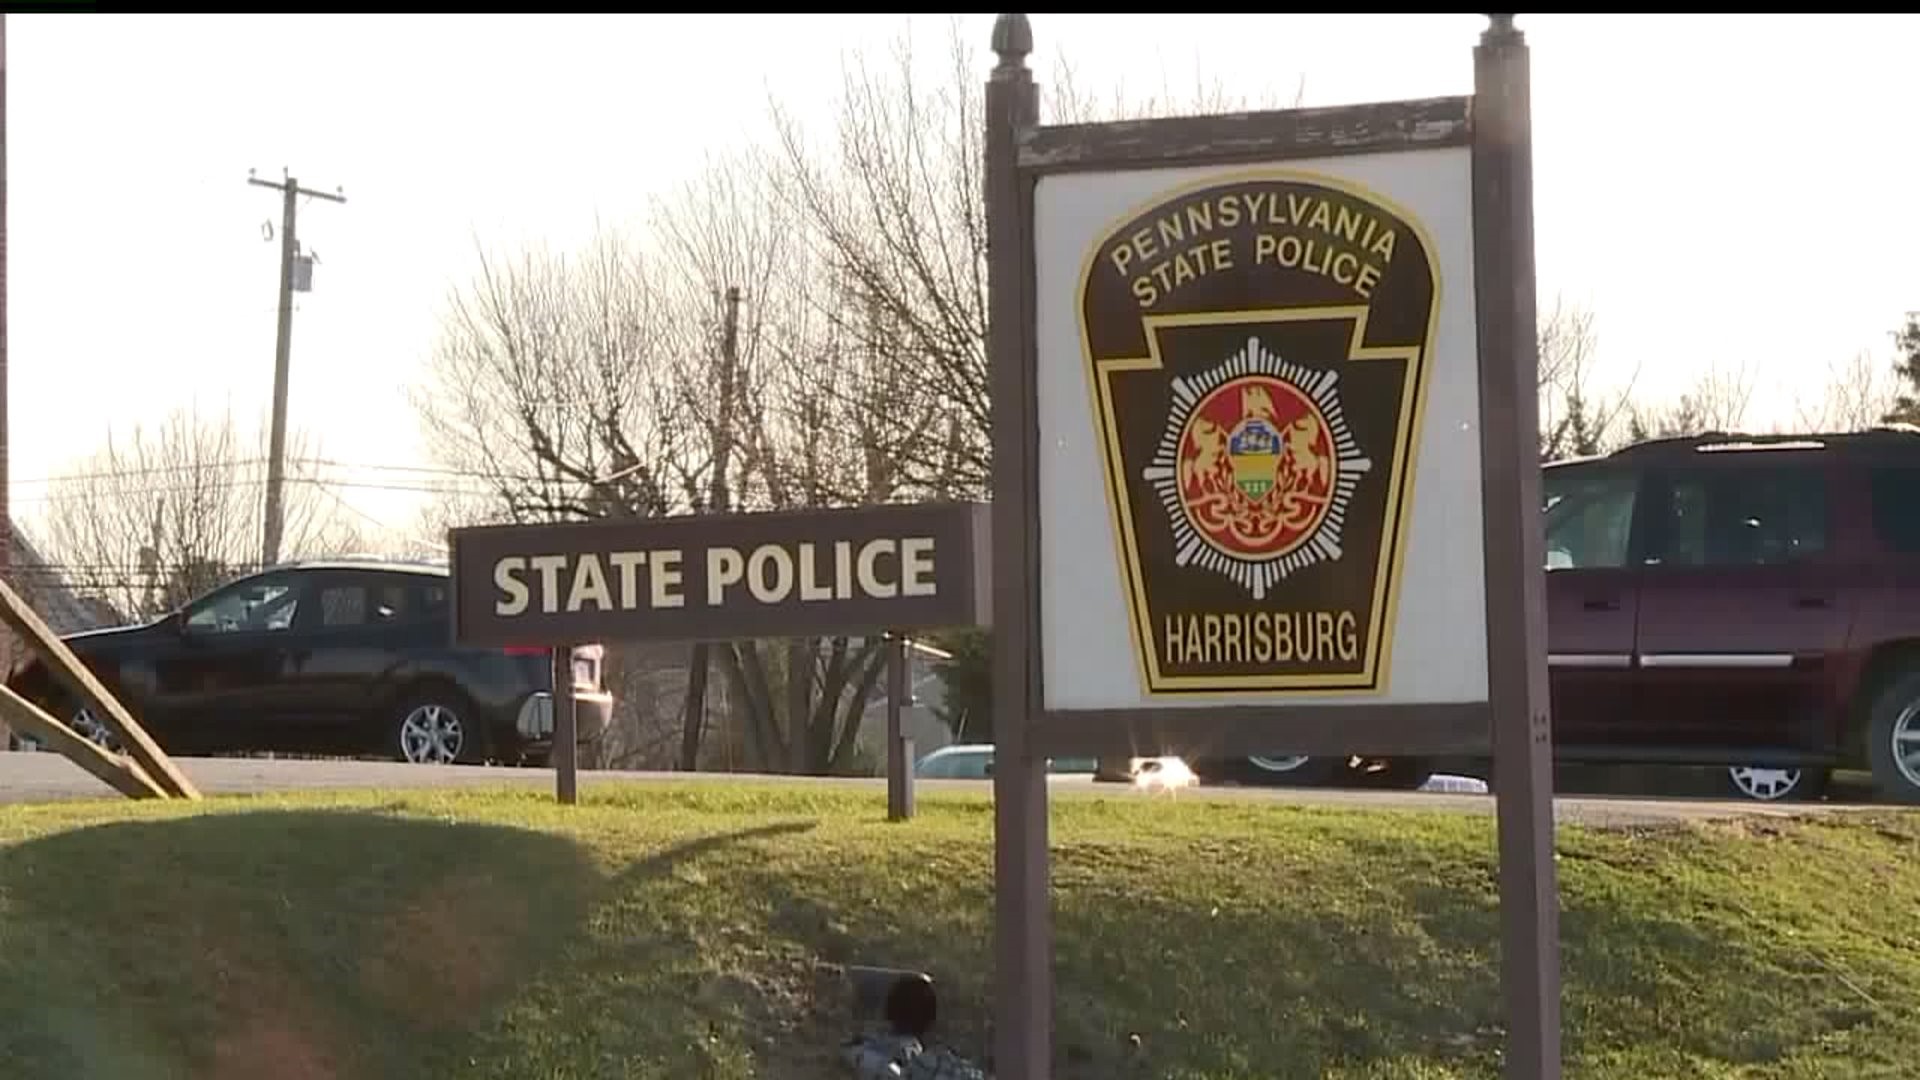 Police future in West Hanover township